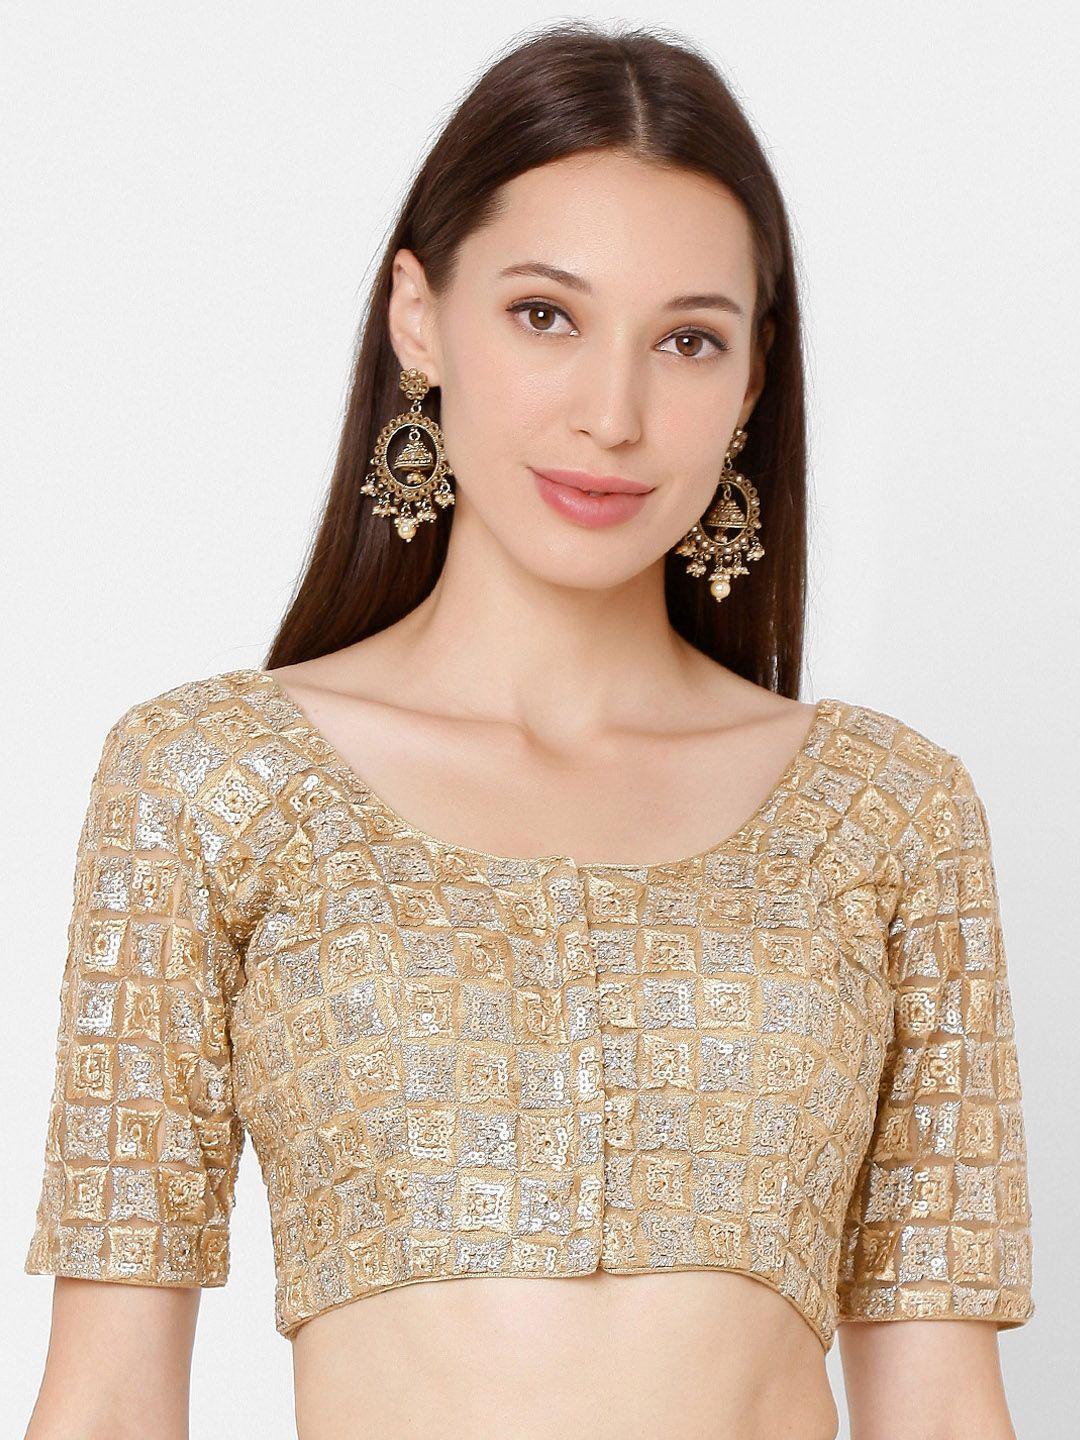 salwar studio gold-colored & silver-colored embroidered readymade saree blouse